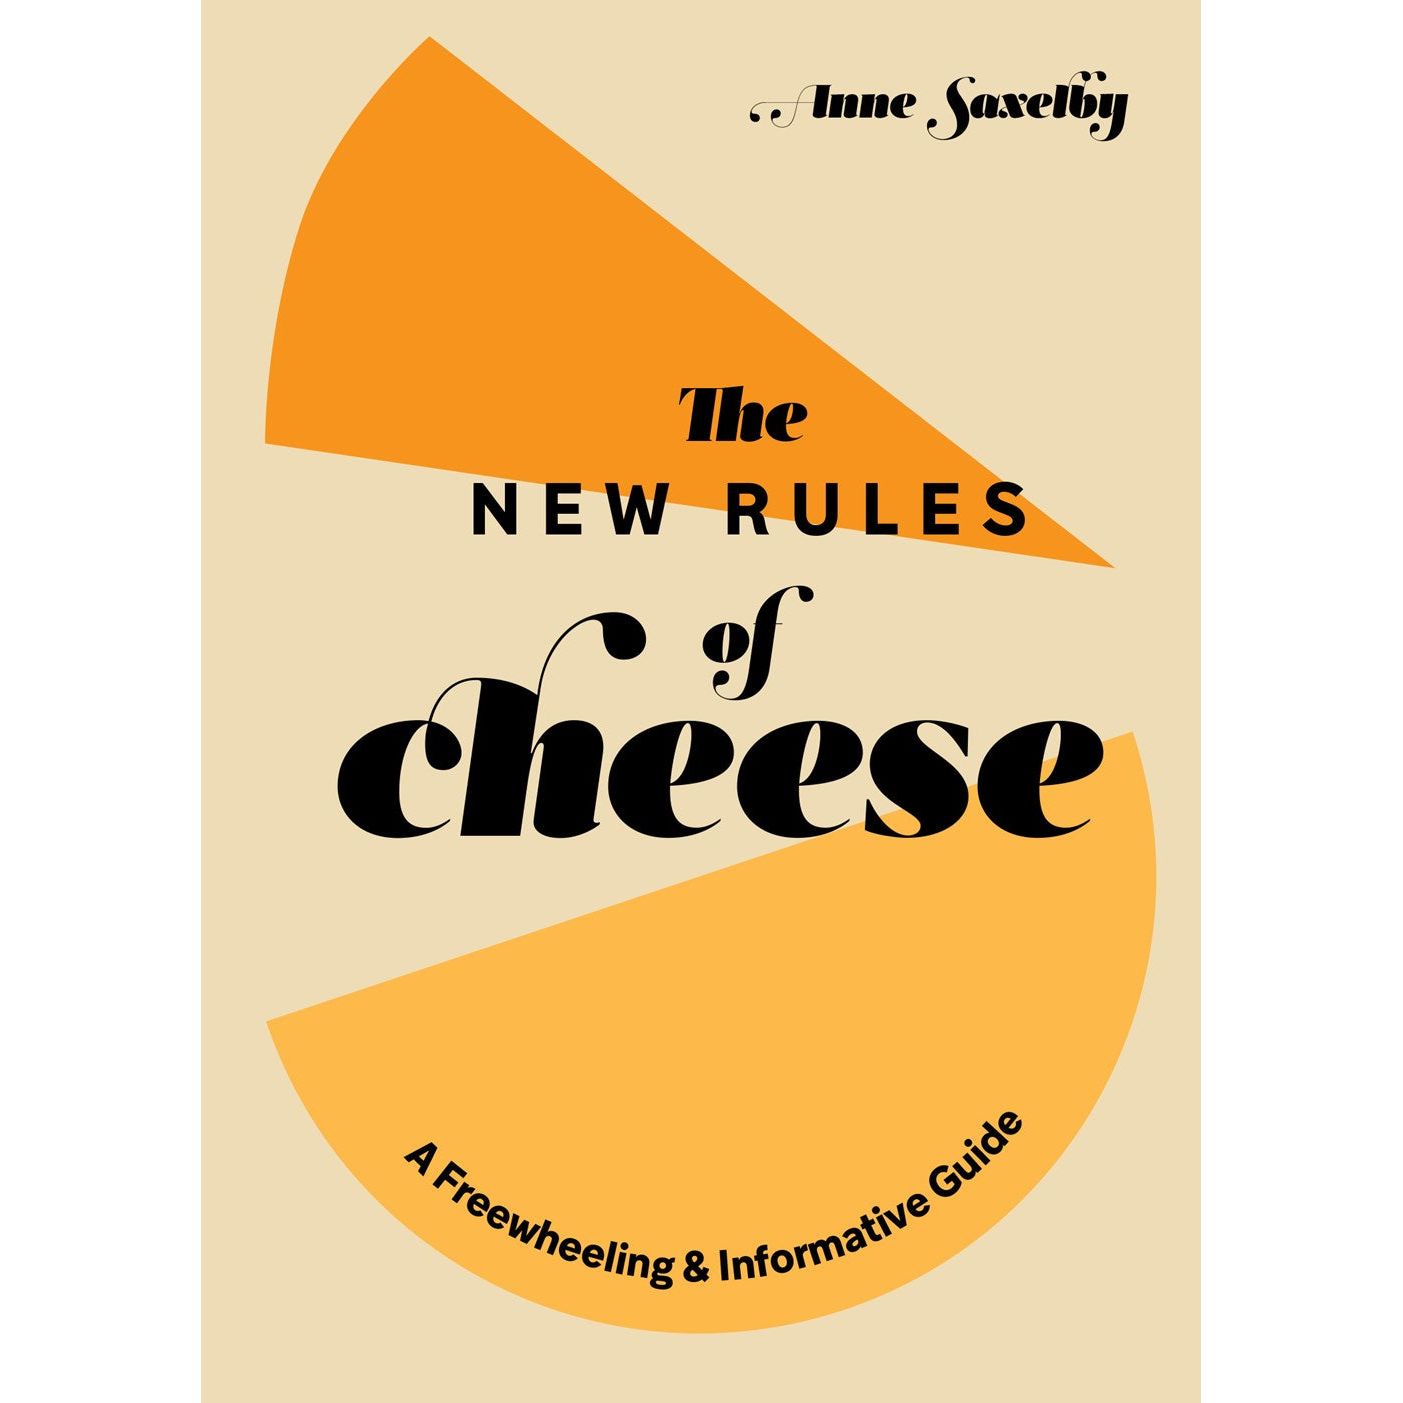 The New Rules of Cheese (Anne Saxelby)